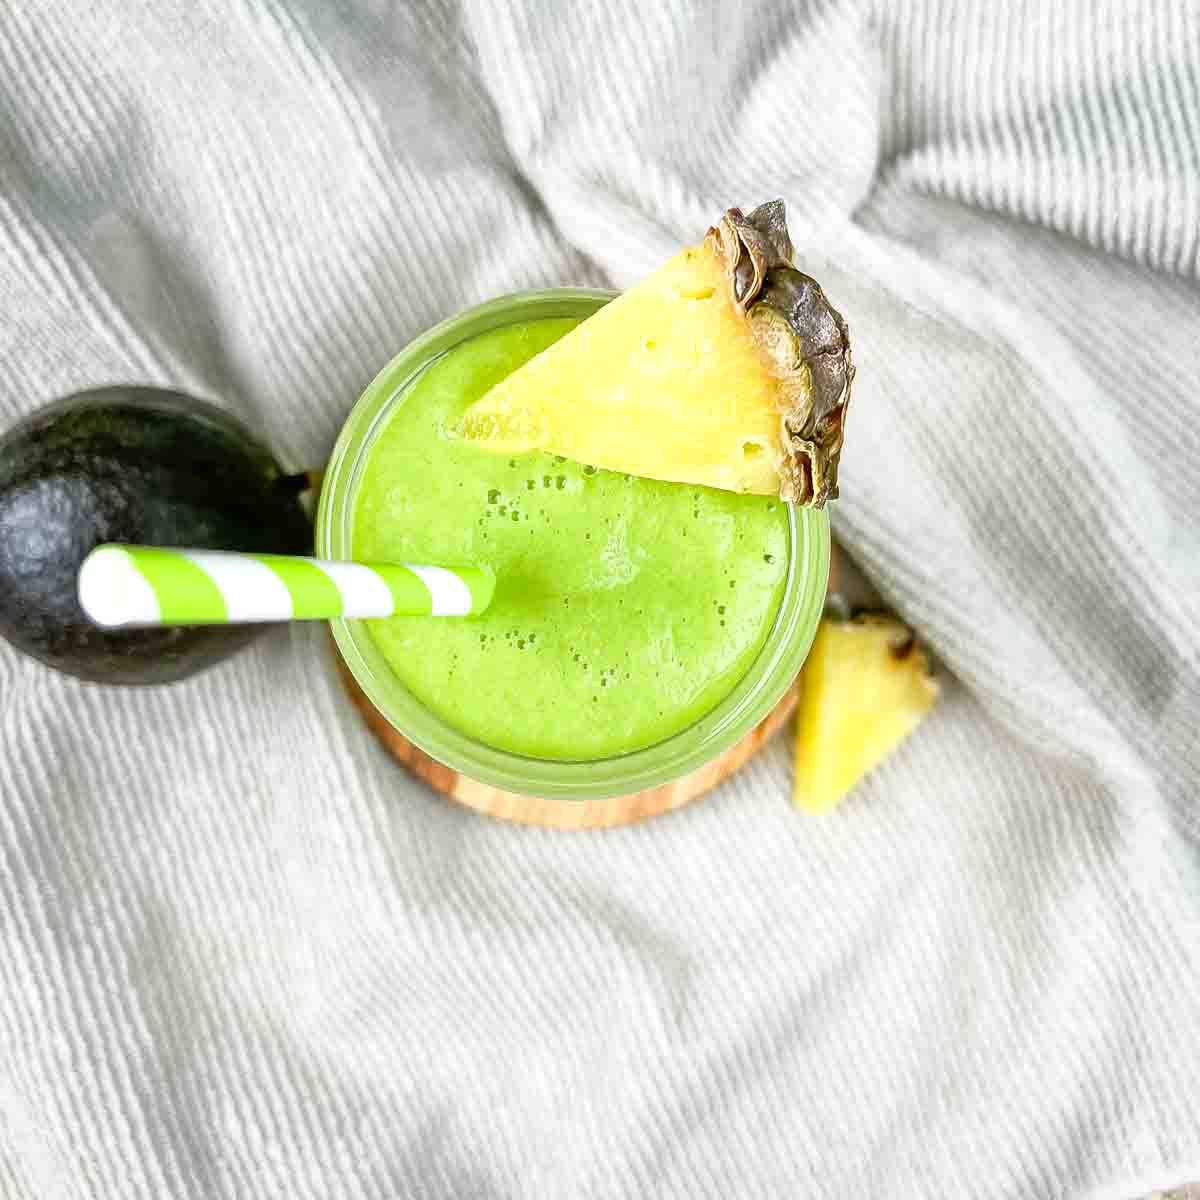 The green smoothie in a glass with a wedge of pineapple on the rim.